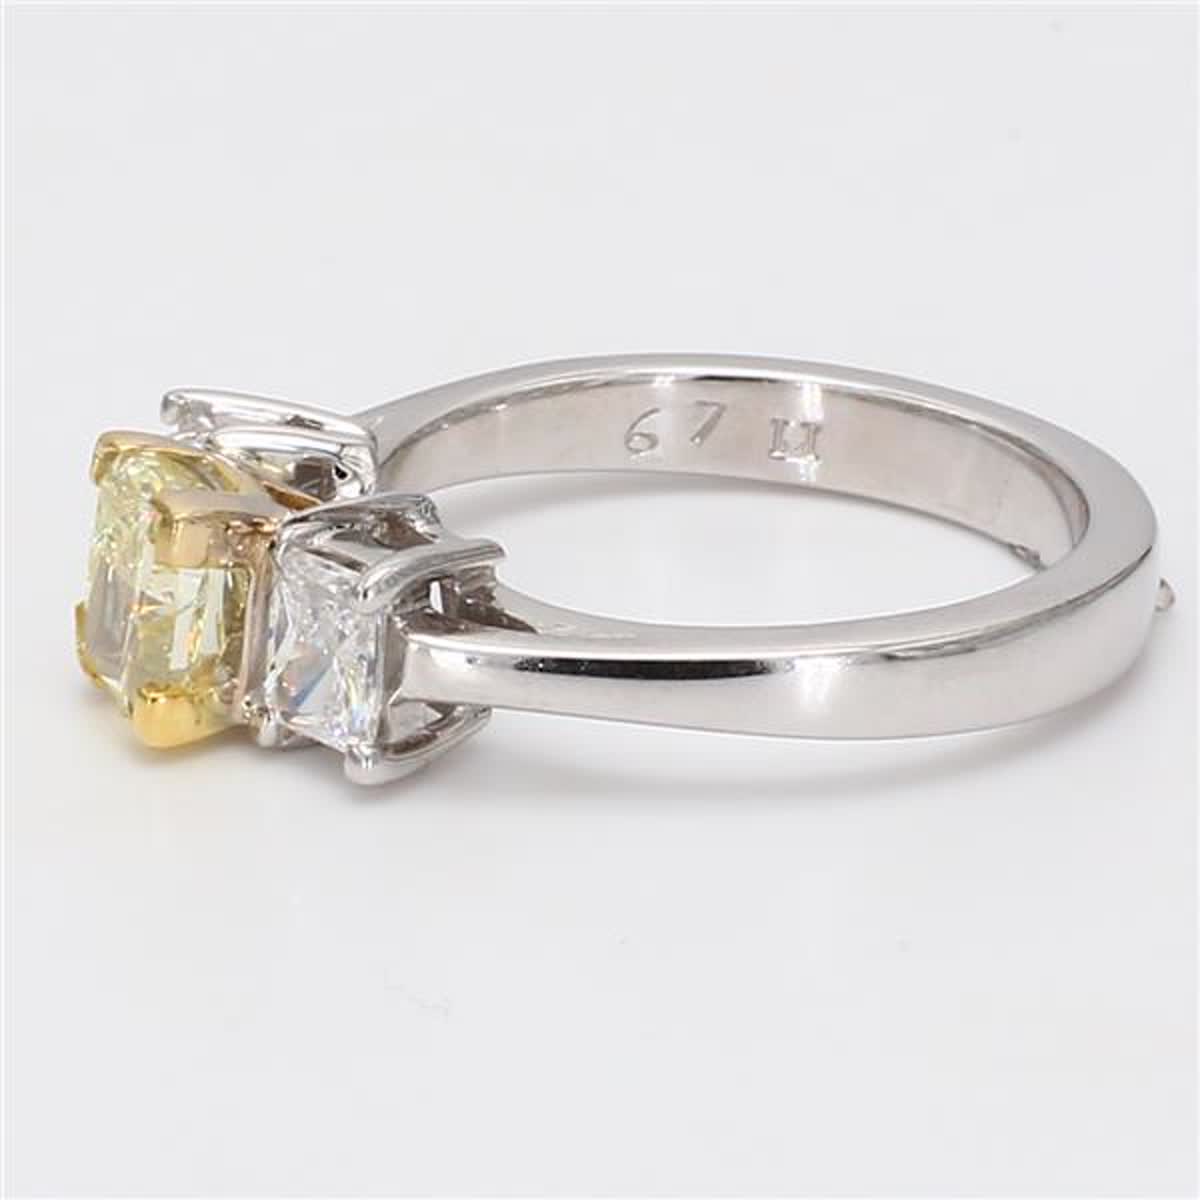 Natural Yellow Cushion and White Diamond 1.83 Carat TW Gold Cocktail Ring